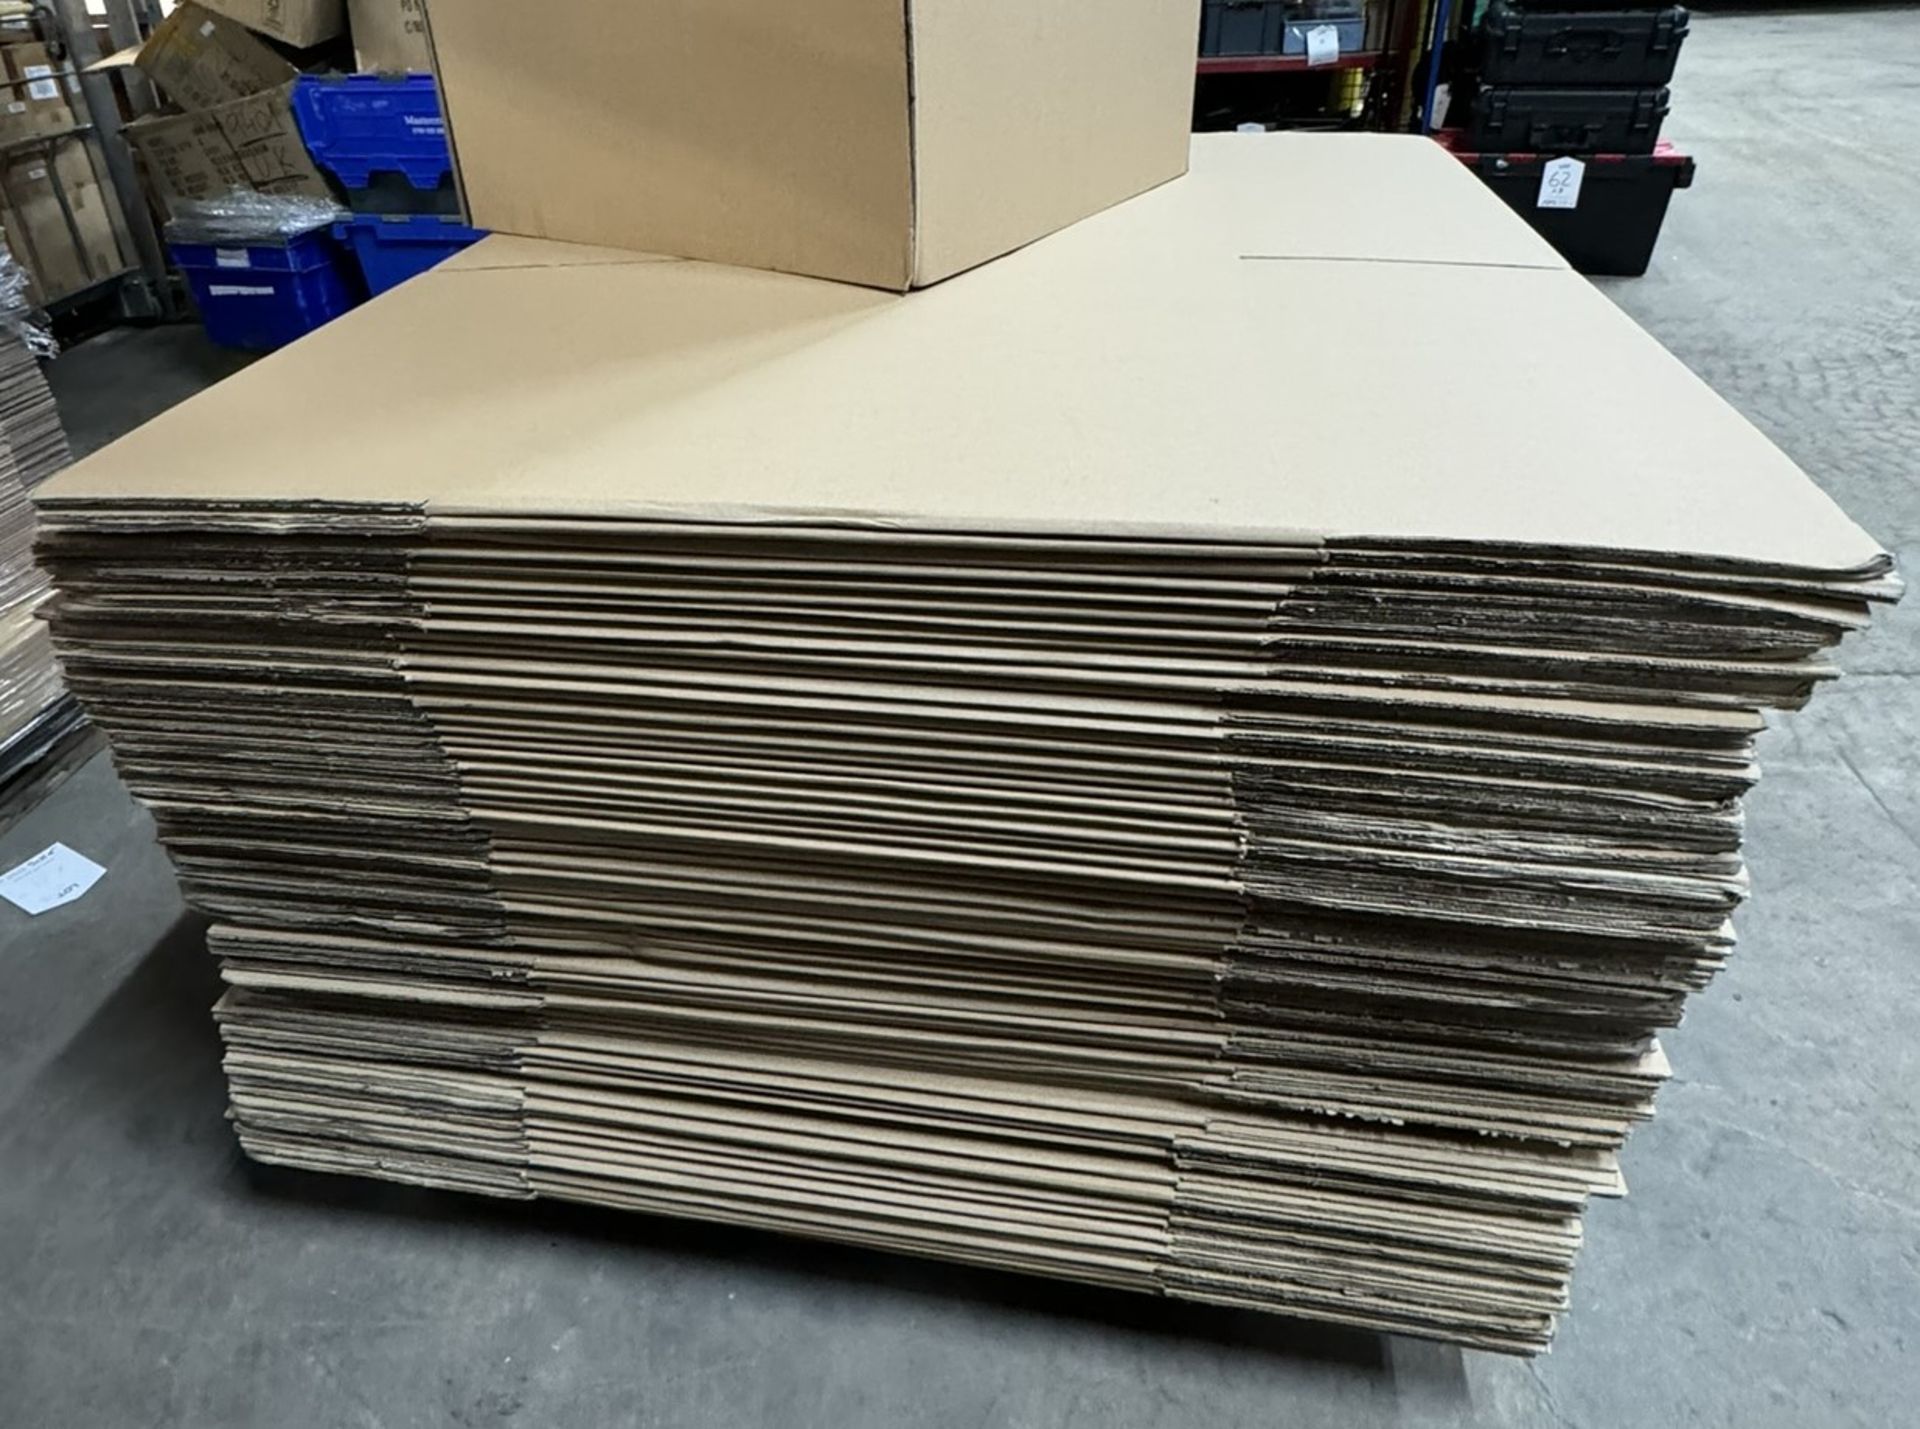 150 x Unbranded Double Wall Cardboard Boxes | 60 x 60 x 70CM - Image 4 of 5